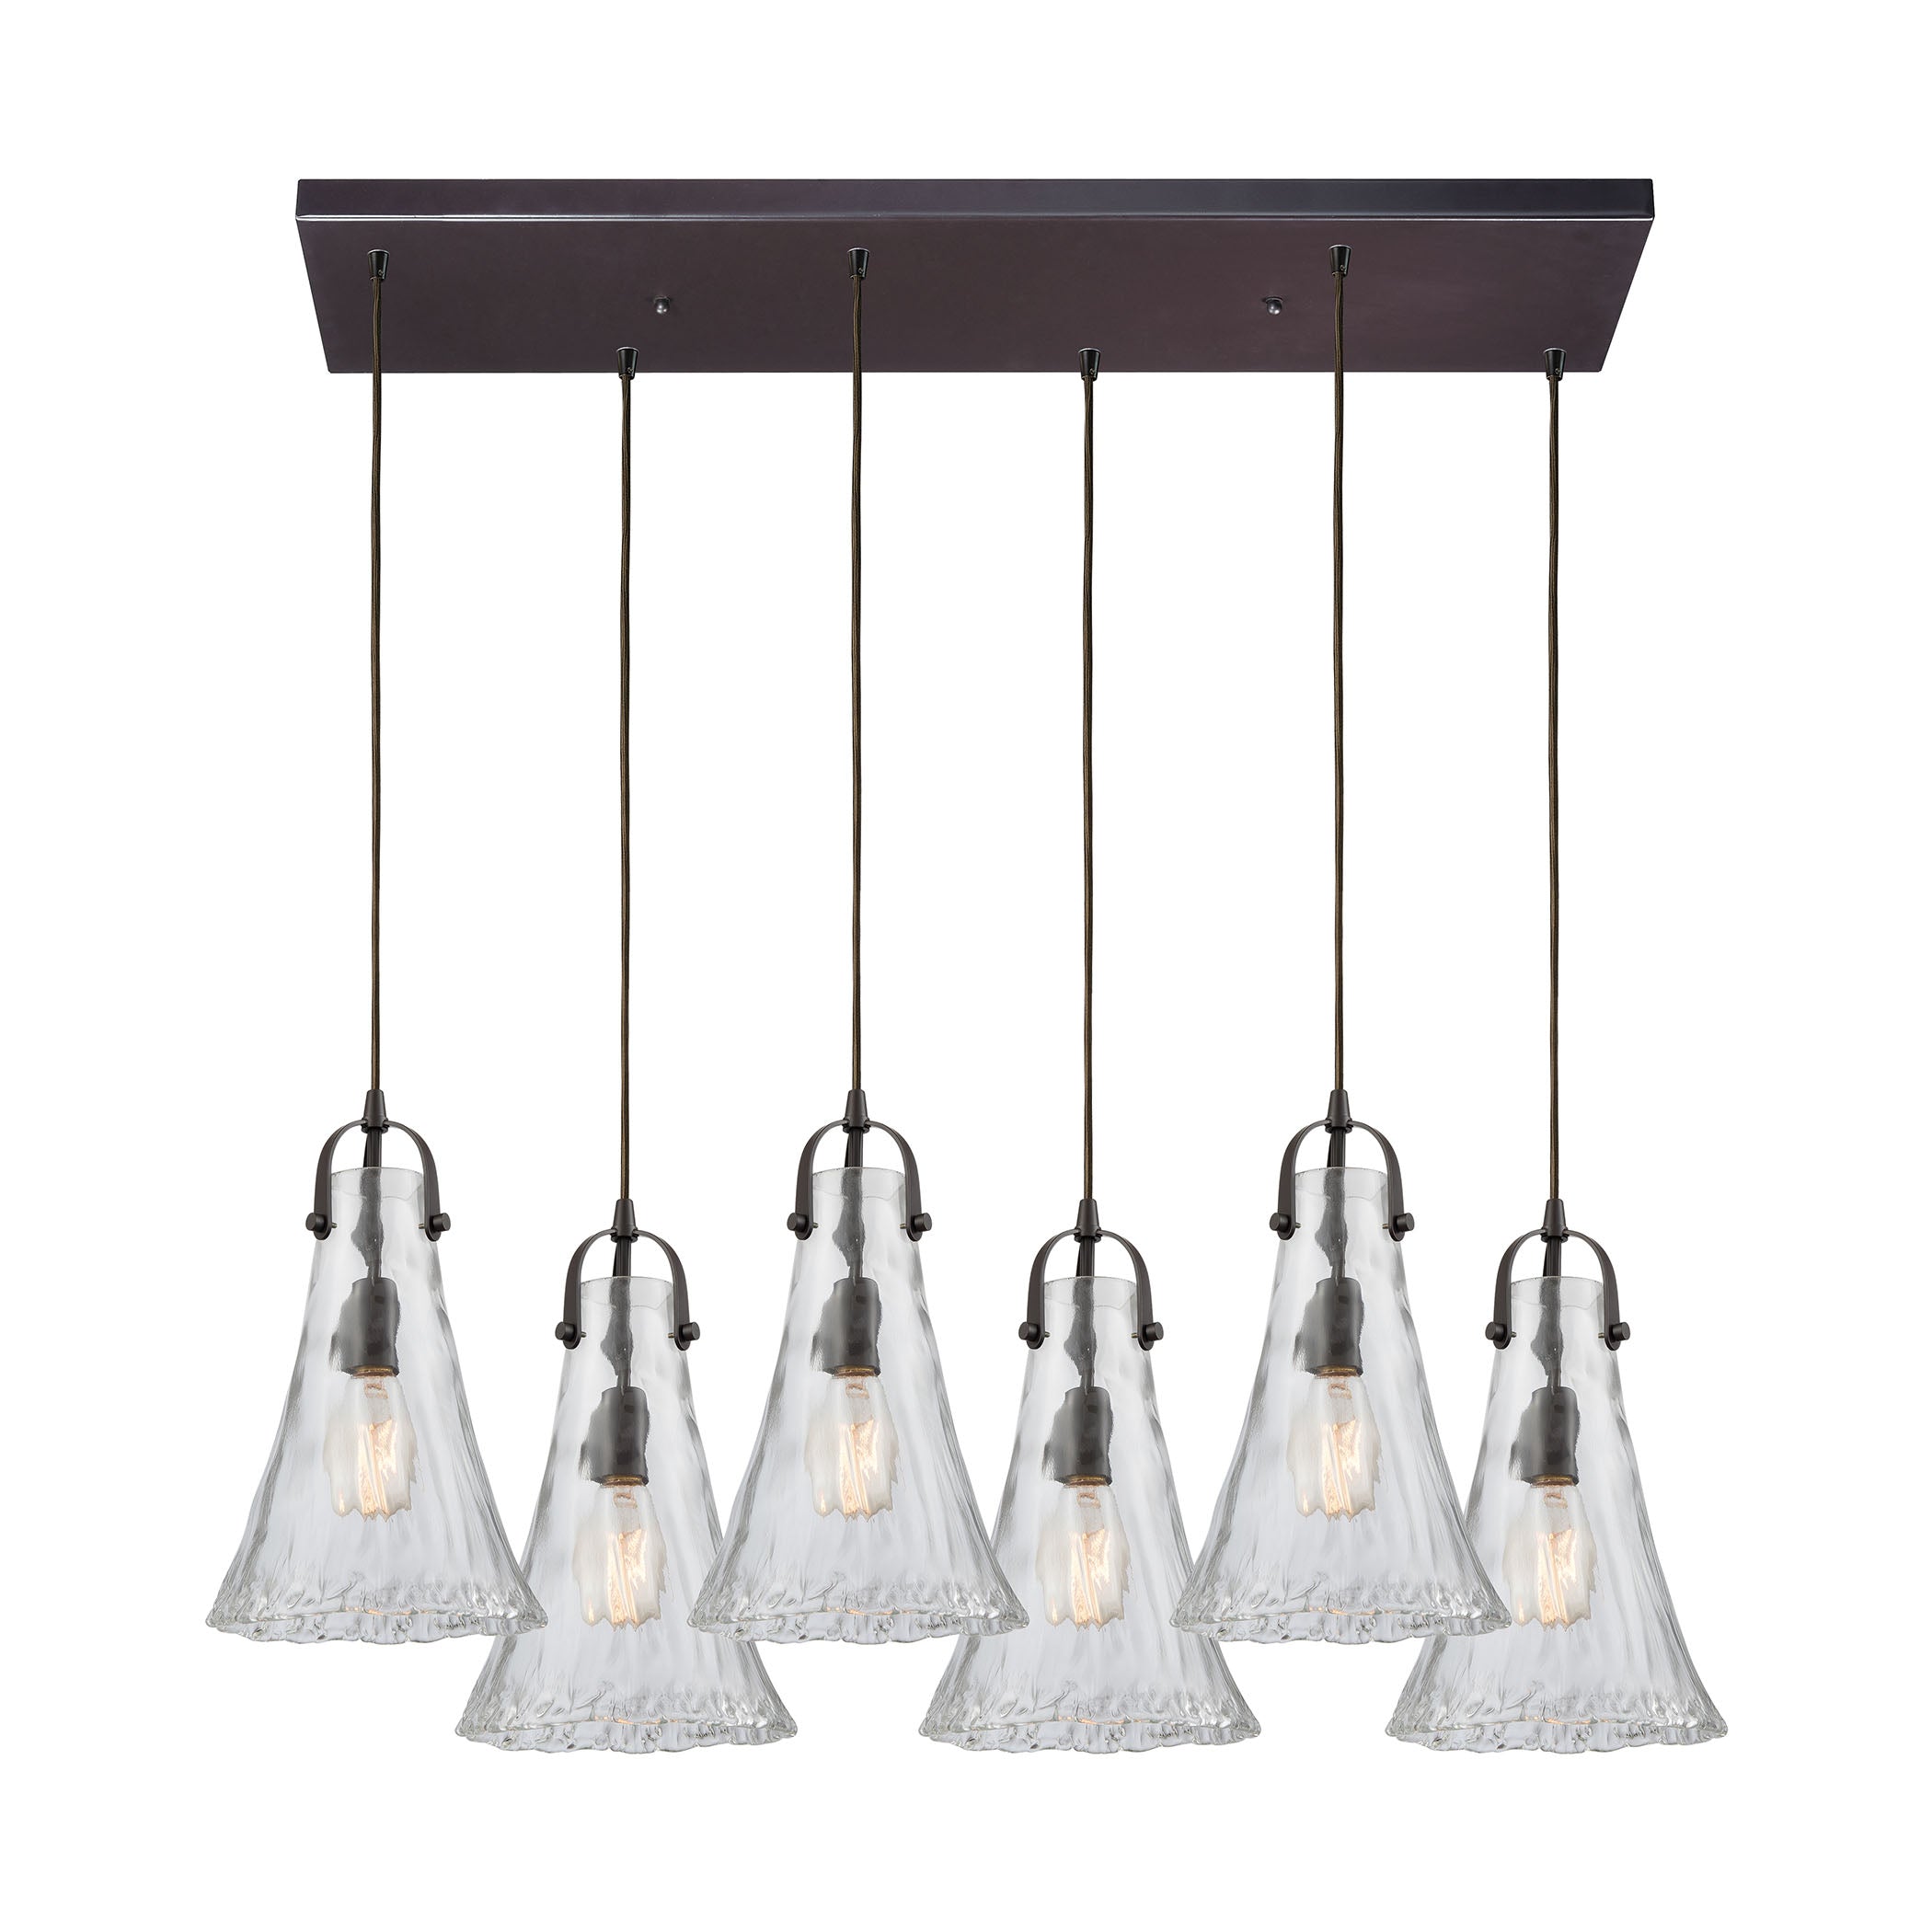 ELK Lighting 10555/6RC Hand Formed Glass 6-Light Rectangular Pendant Fixture in Oiled Bronze with Clear Hand-formed Glass